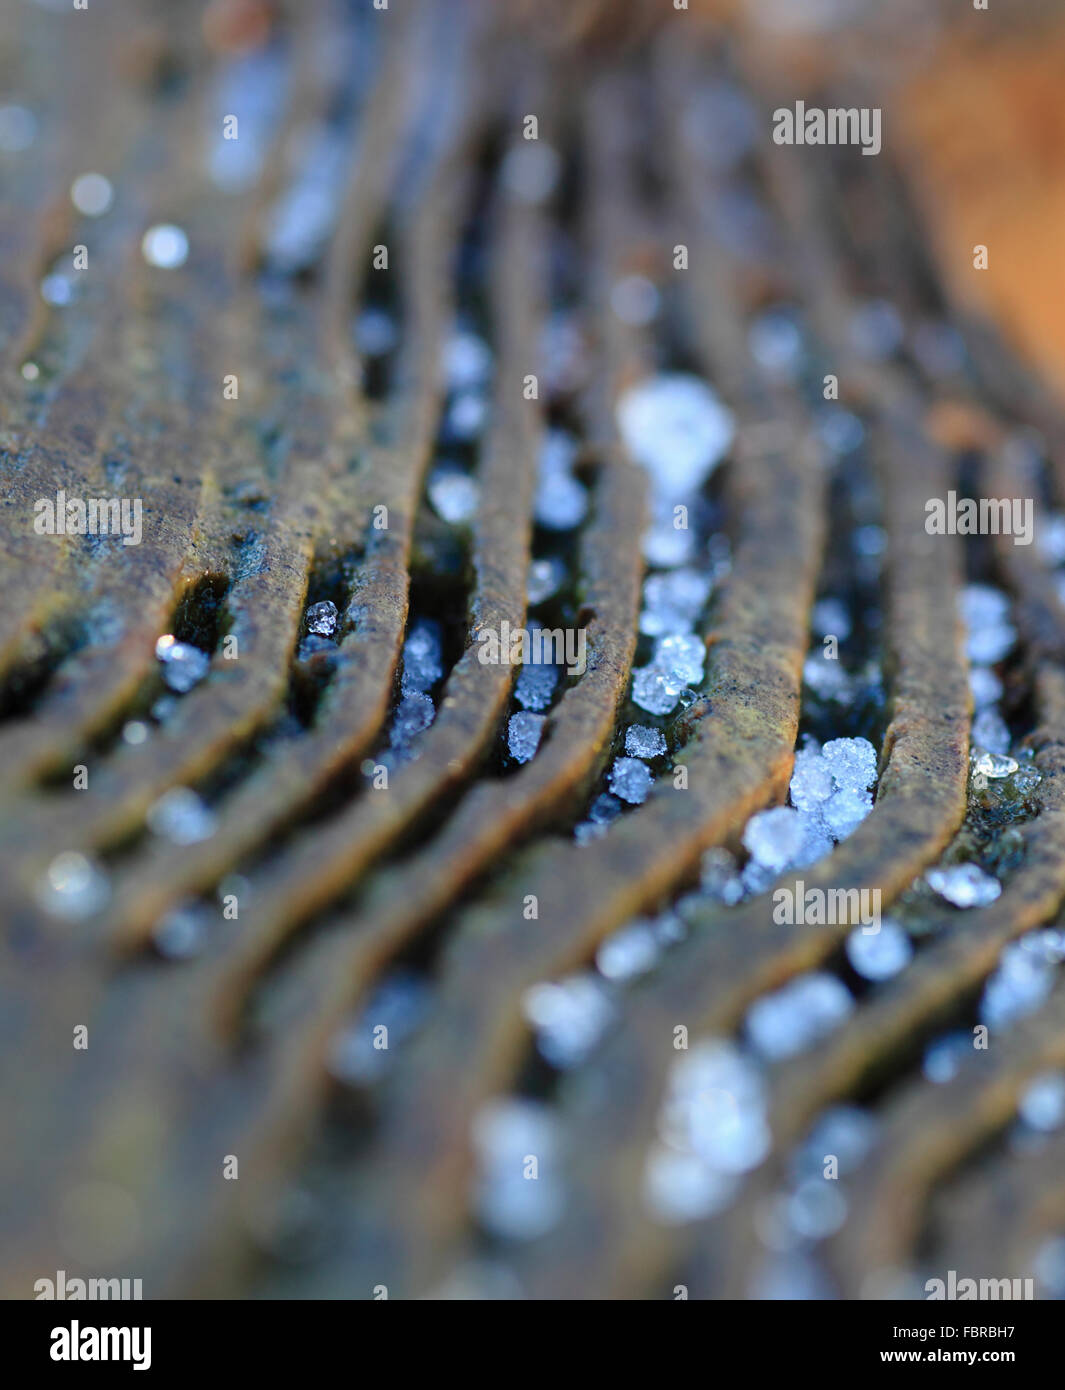 Frozen water droplets in the grooves of a tree's rings. Stock Photo